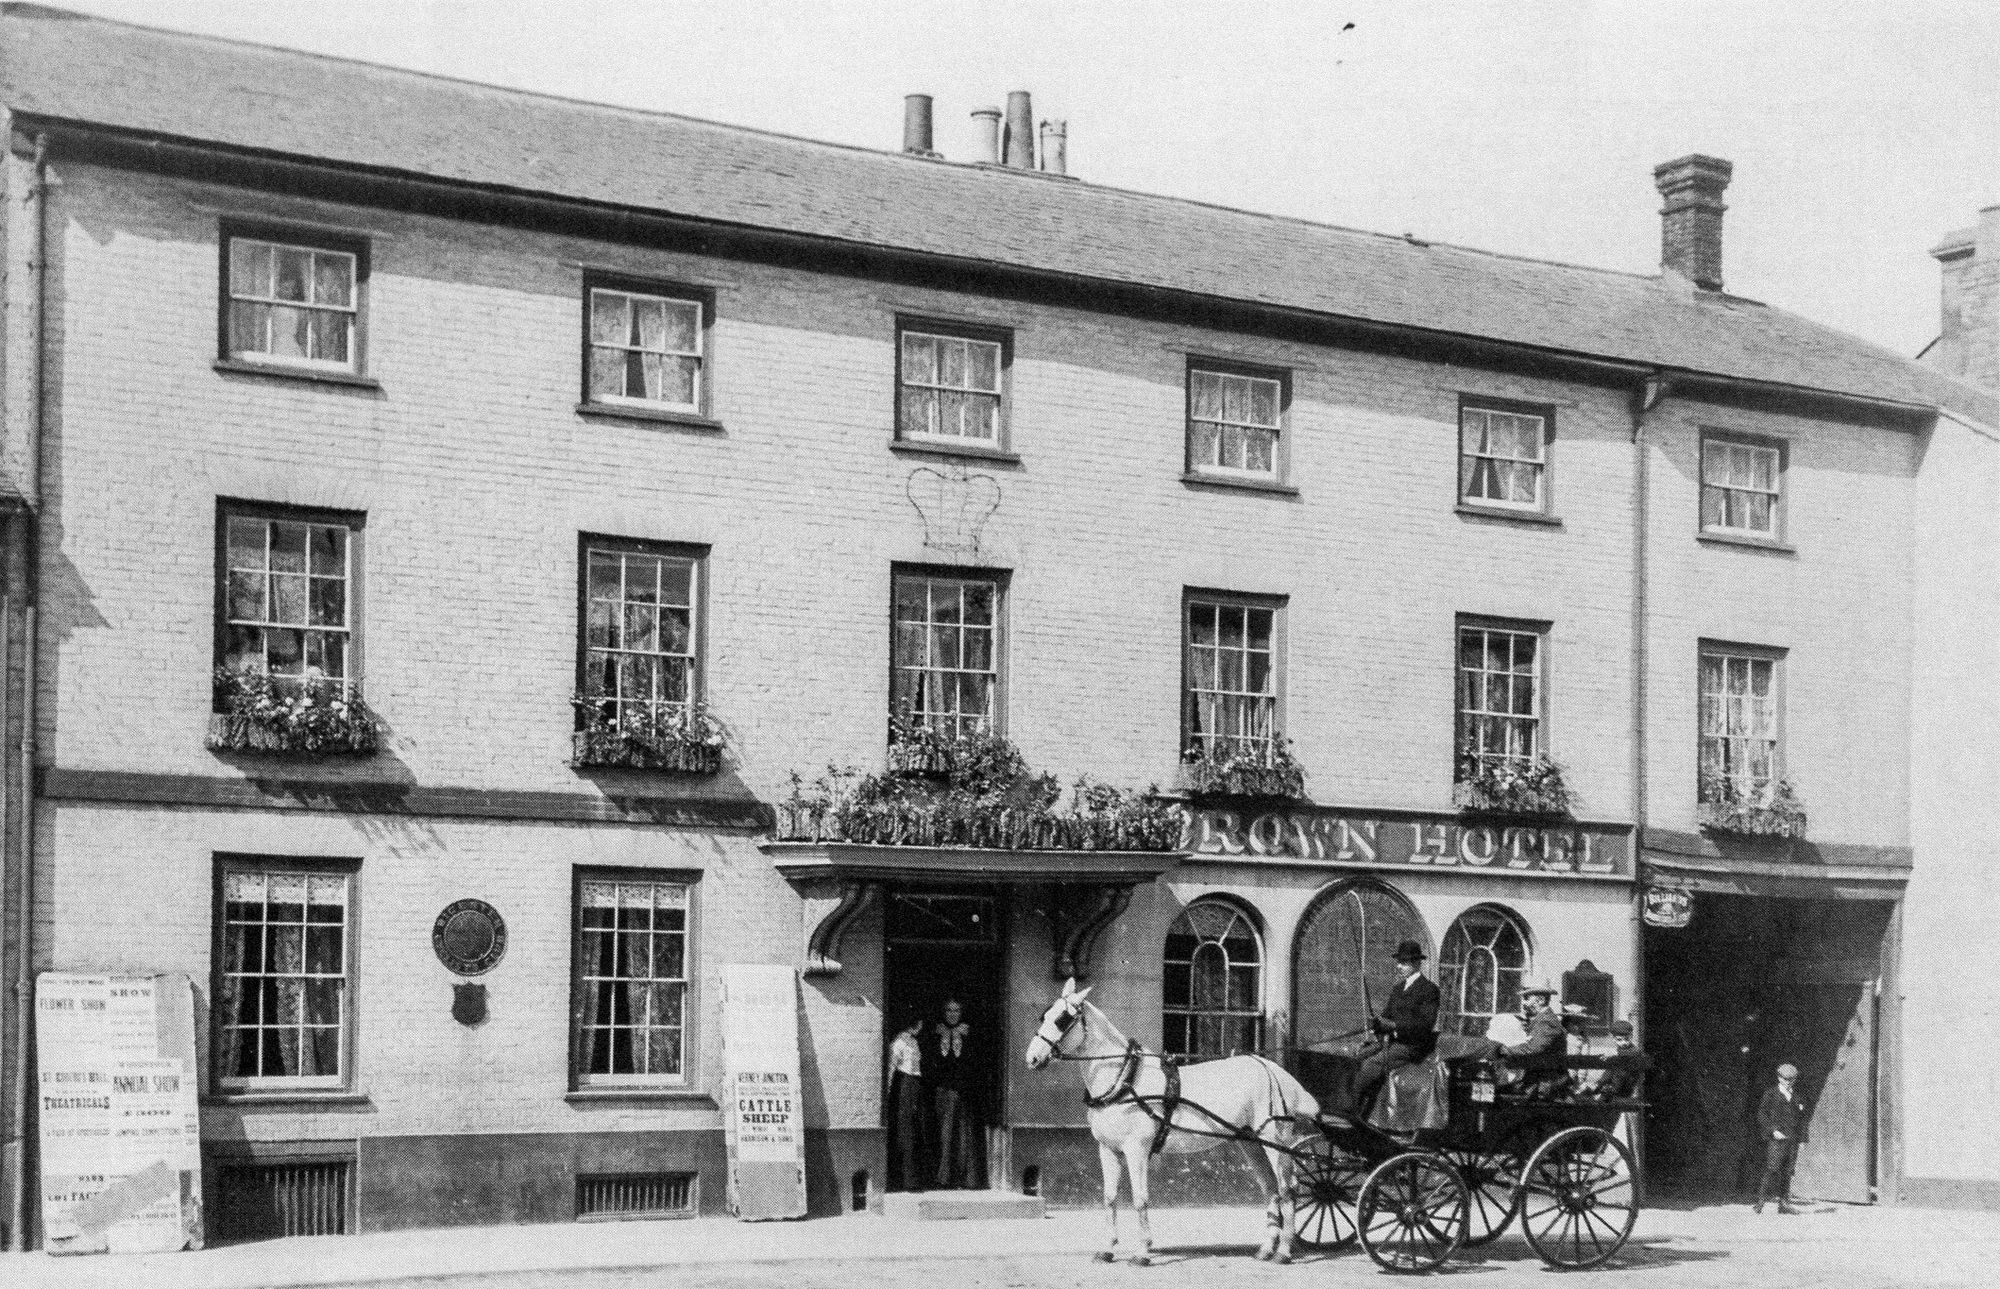 The front of the hotel in 1903 when John Drover took over as proprietor. John is seen sitting in the back of the cart while his wife, Margaret, stands in the hotel doorway.